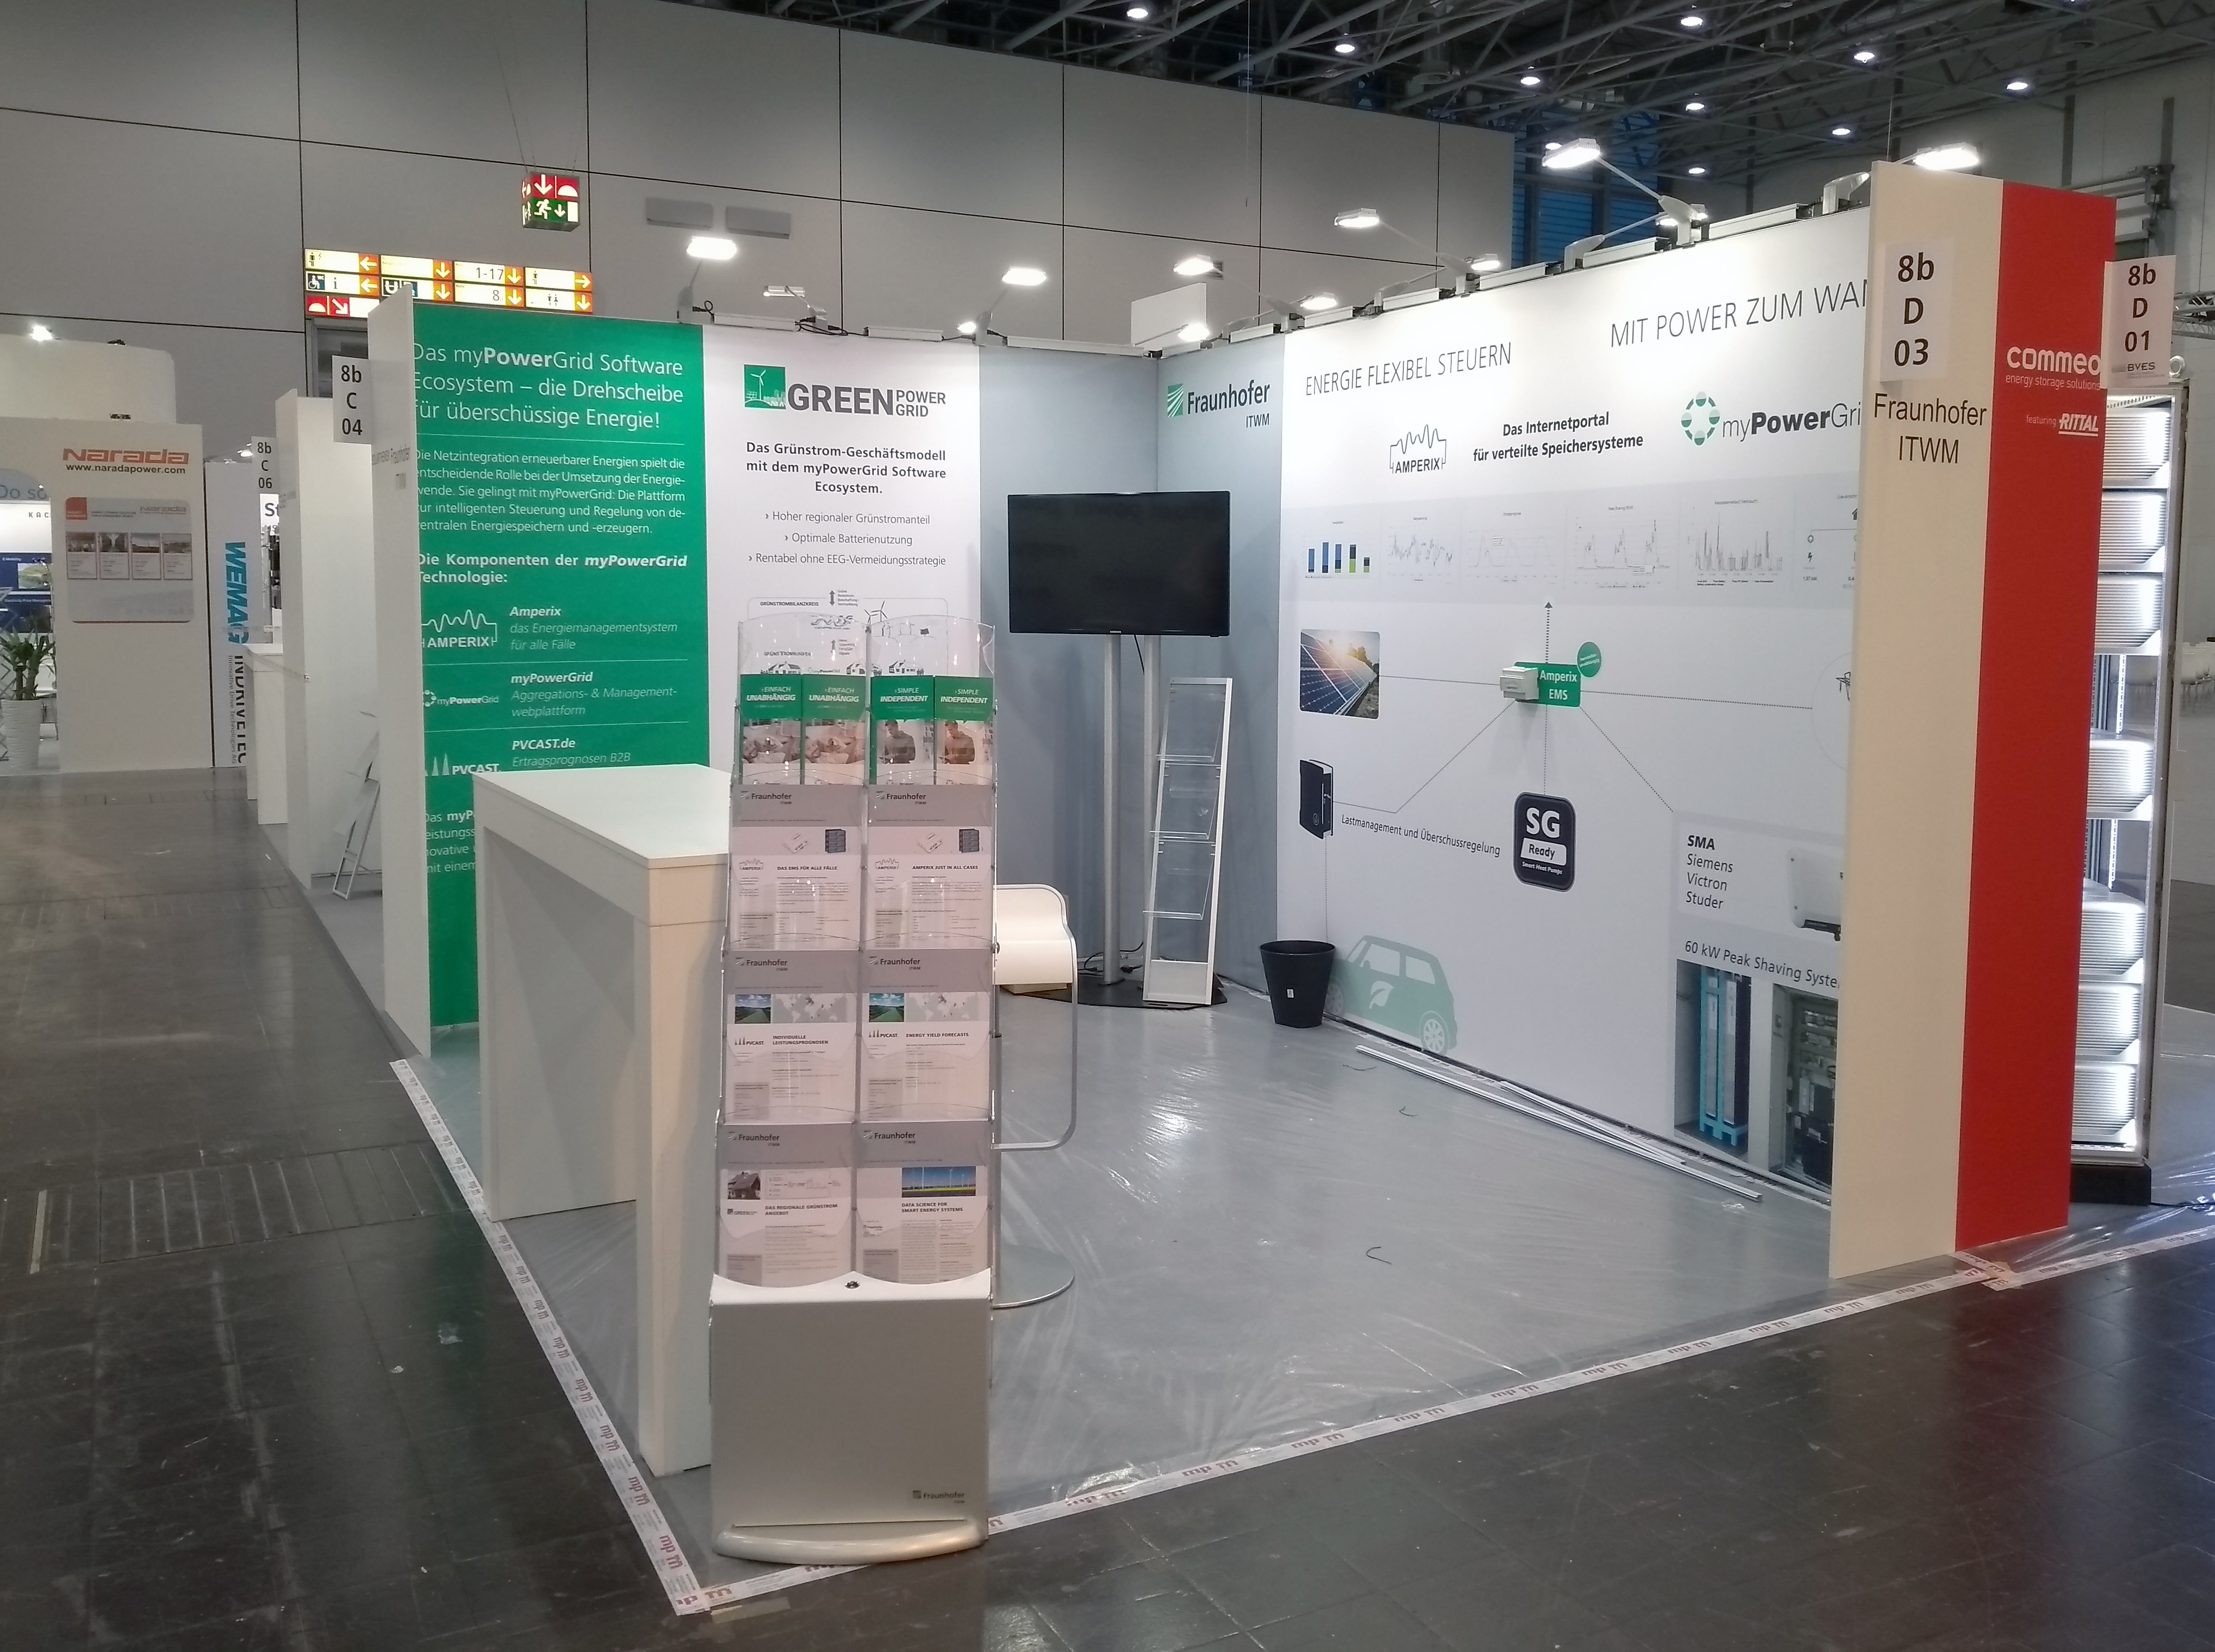 Our booth on our research in the field Green by IT at Energy Storage 2018.